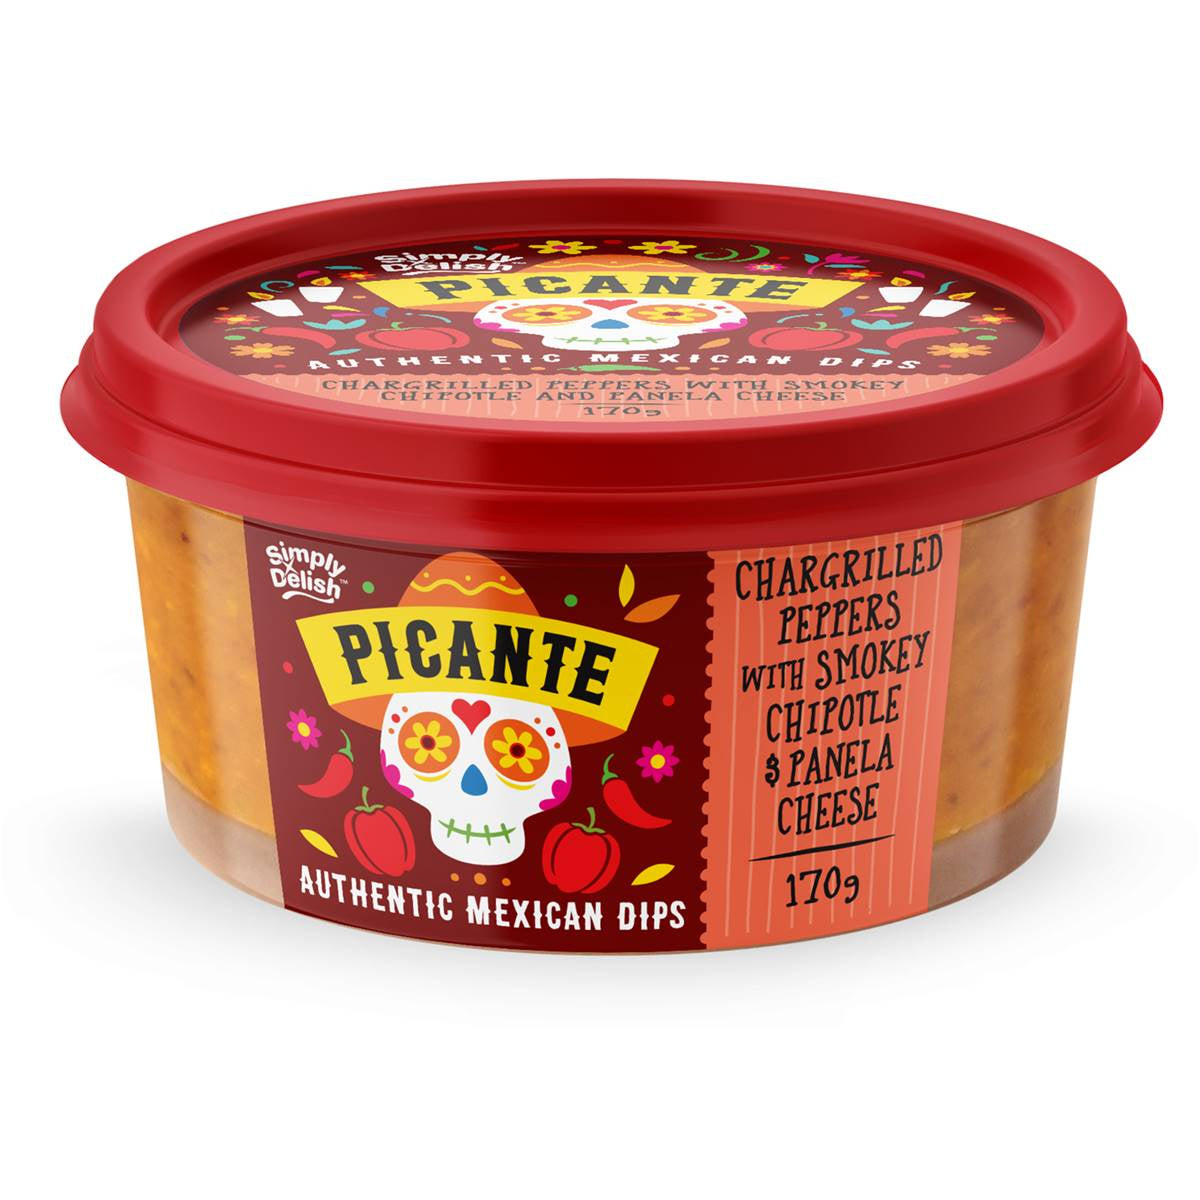 Picante Chargrilled Peppers Smoky Chipotle & Panela Cheese Dip 170g